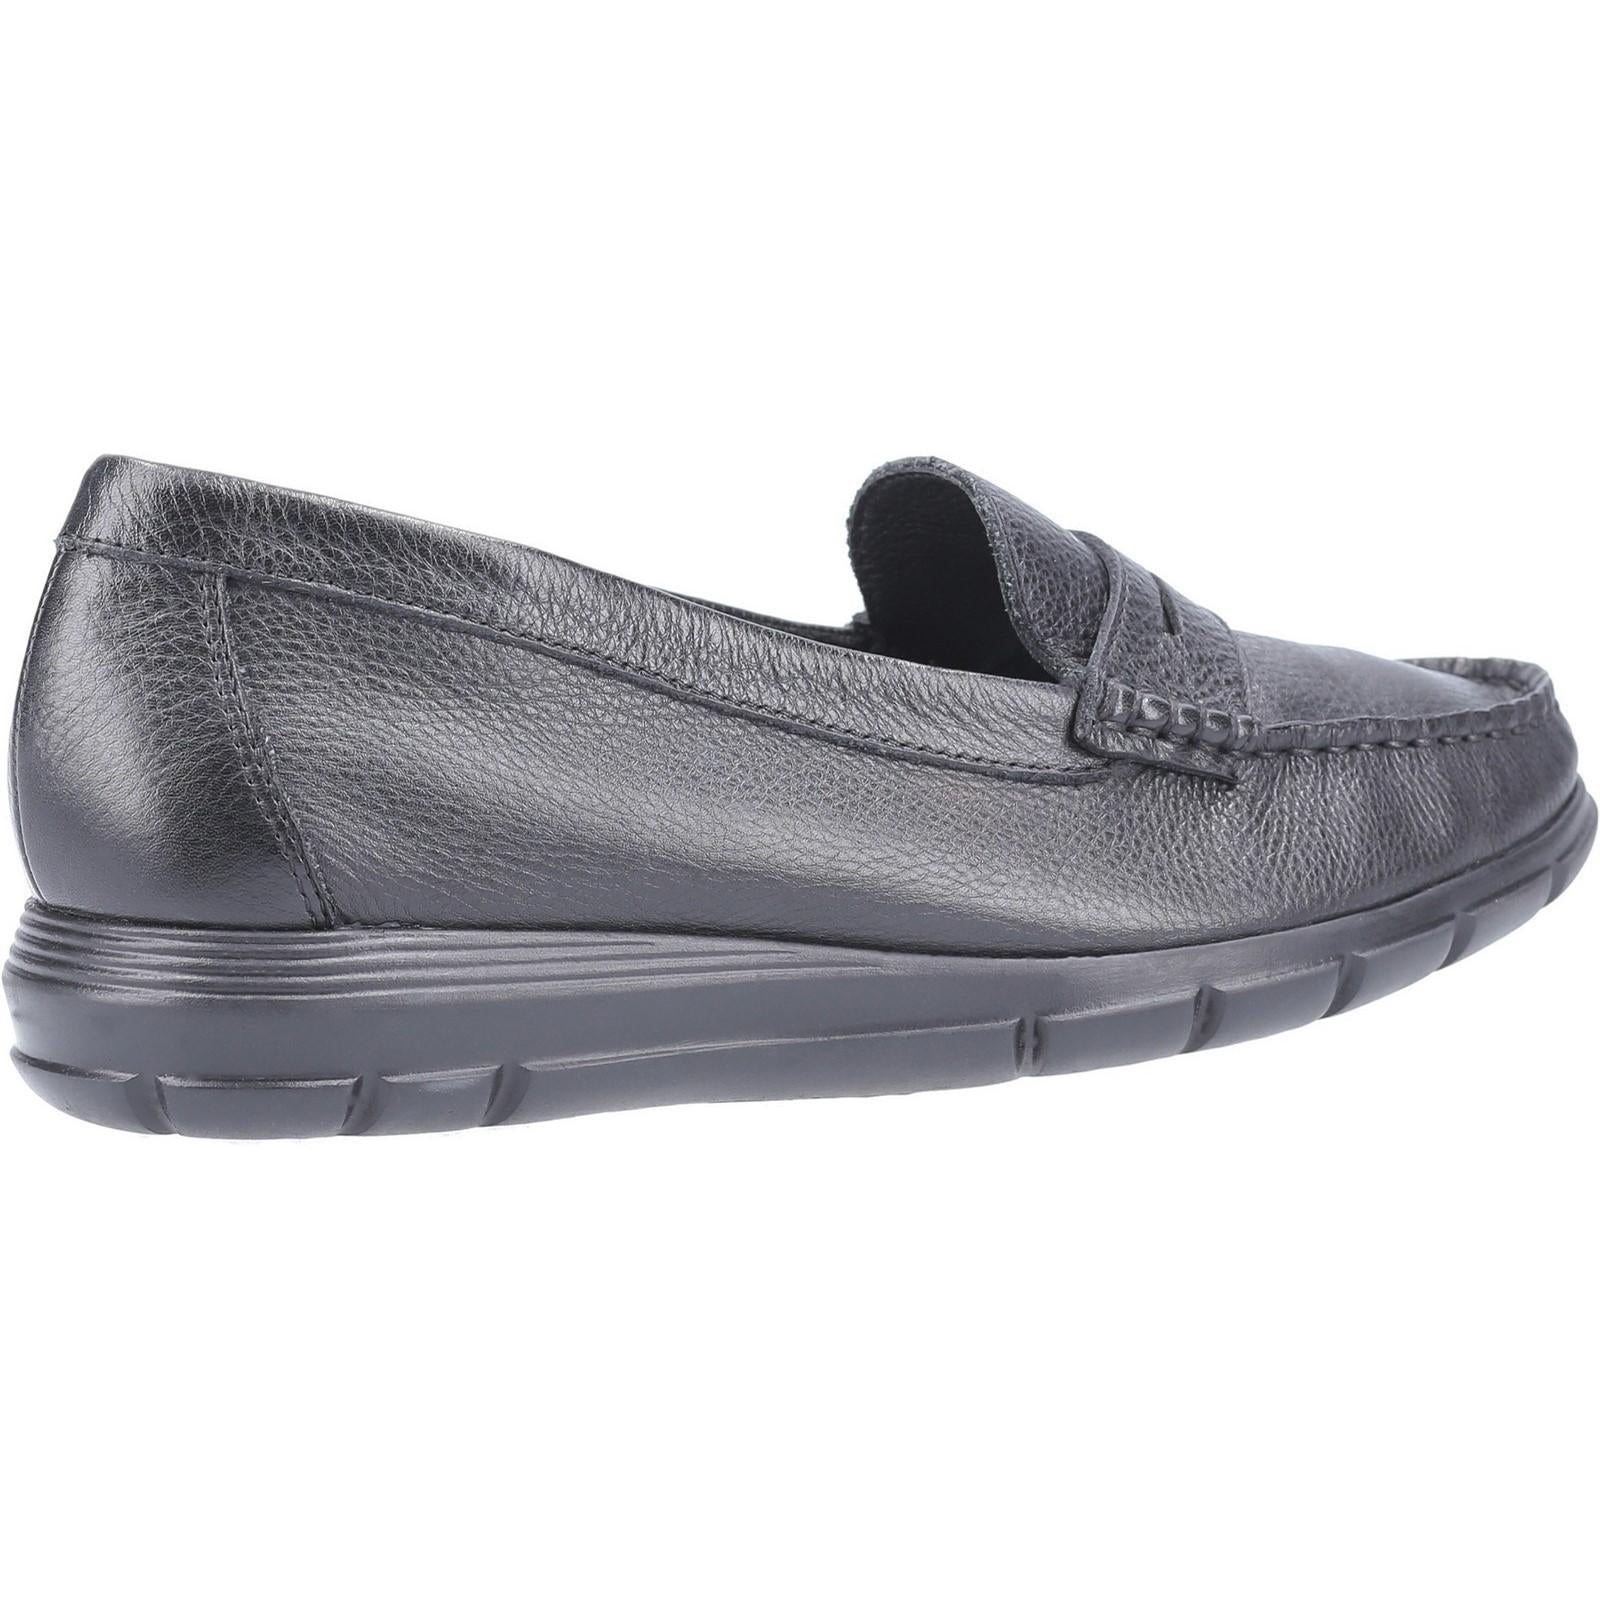 Hush Puppies Paige Slip On Shoes